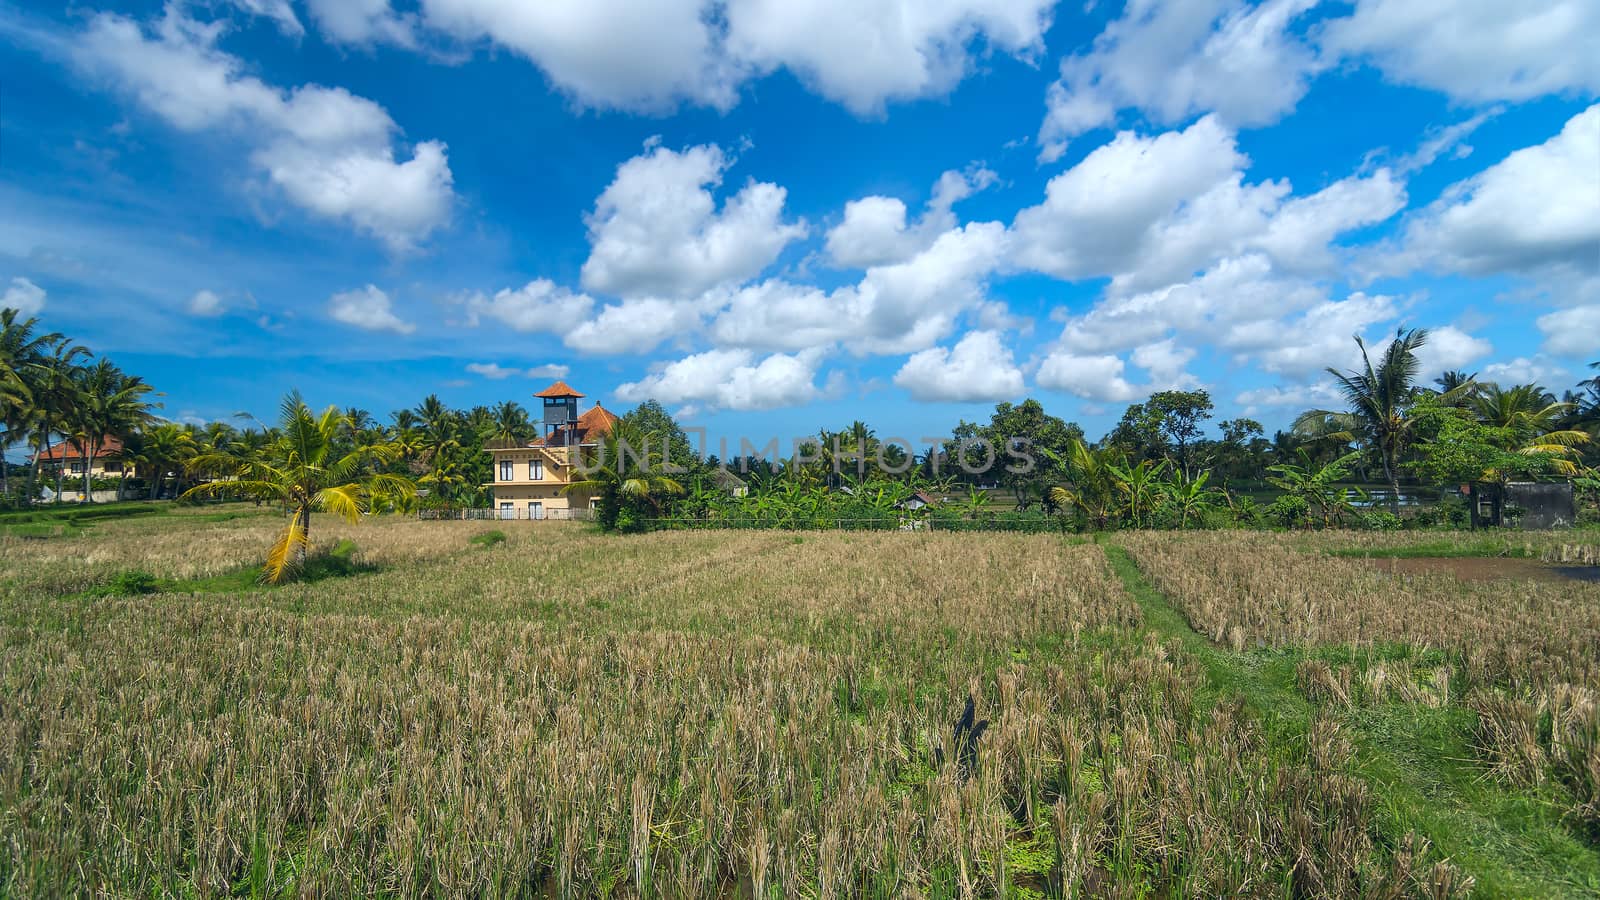 Lonely house on rice field at the town of Ubud in Bali in sunny summer day